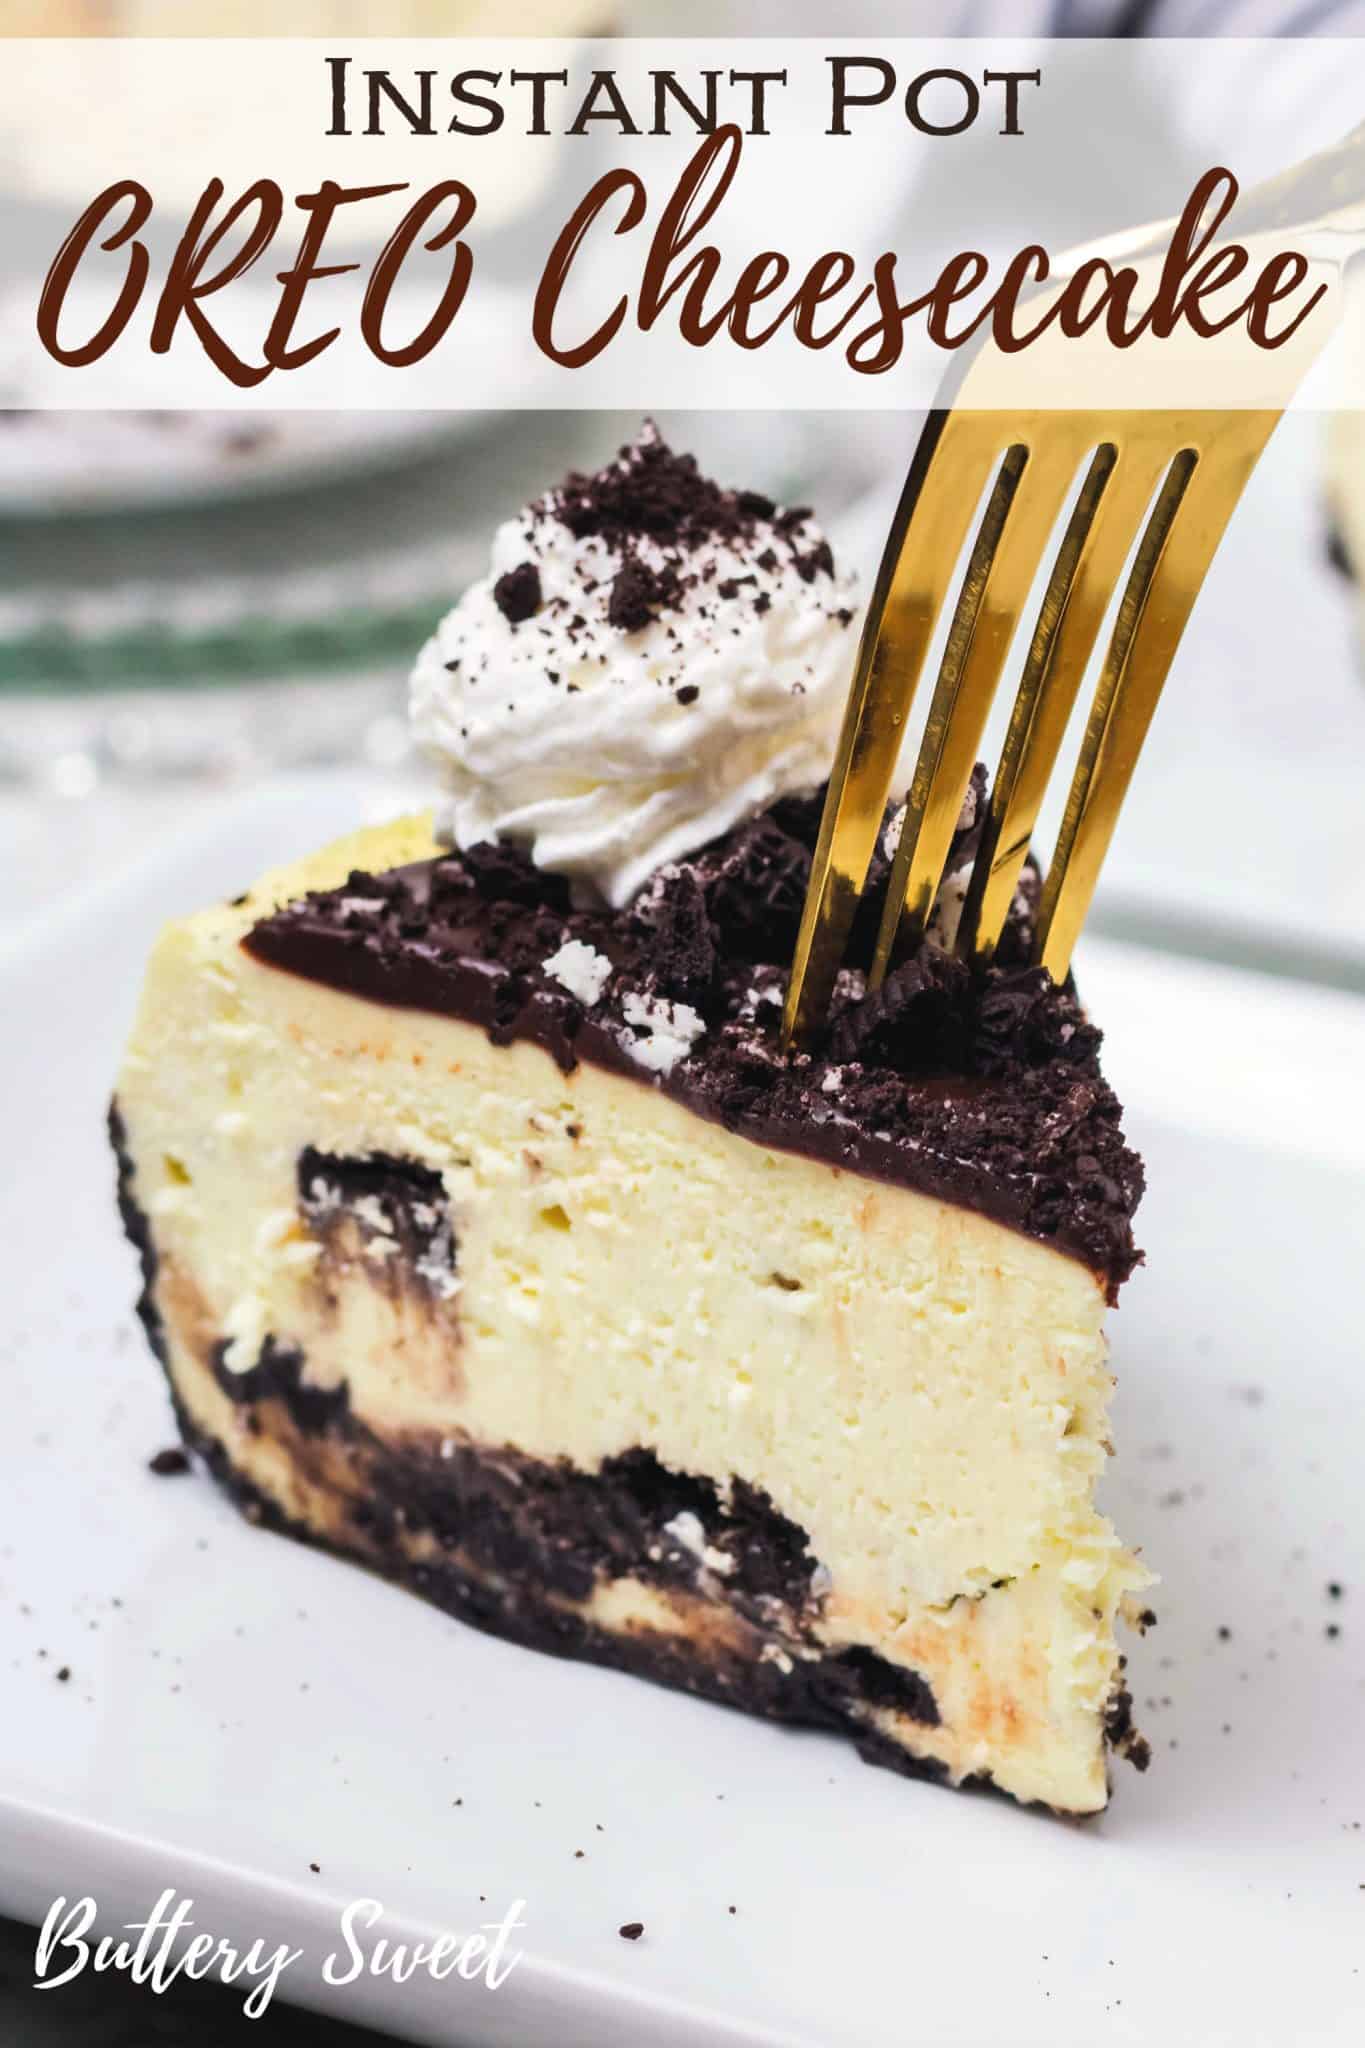 Instant Pot OREO Cheesecake - Buttery Sweet